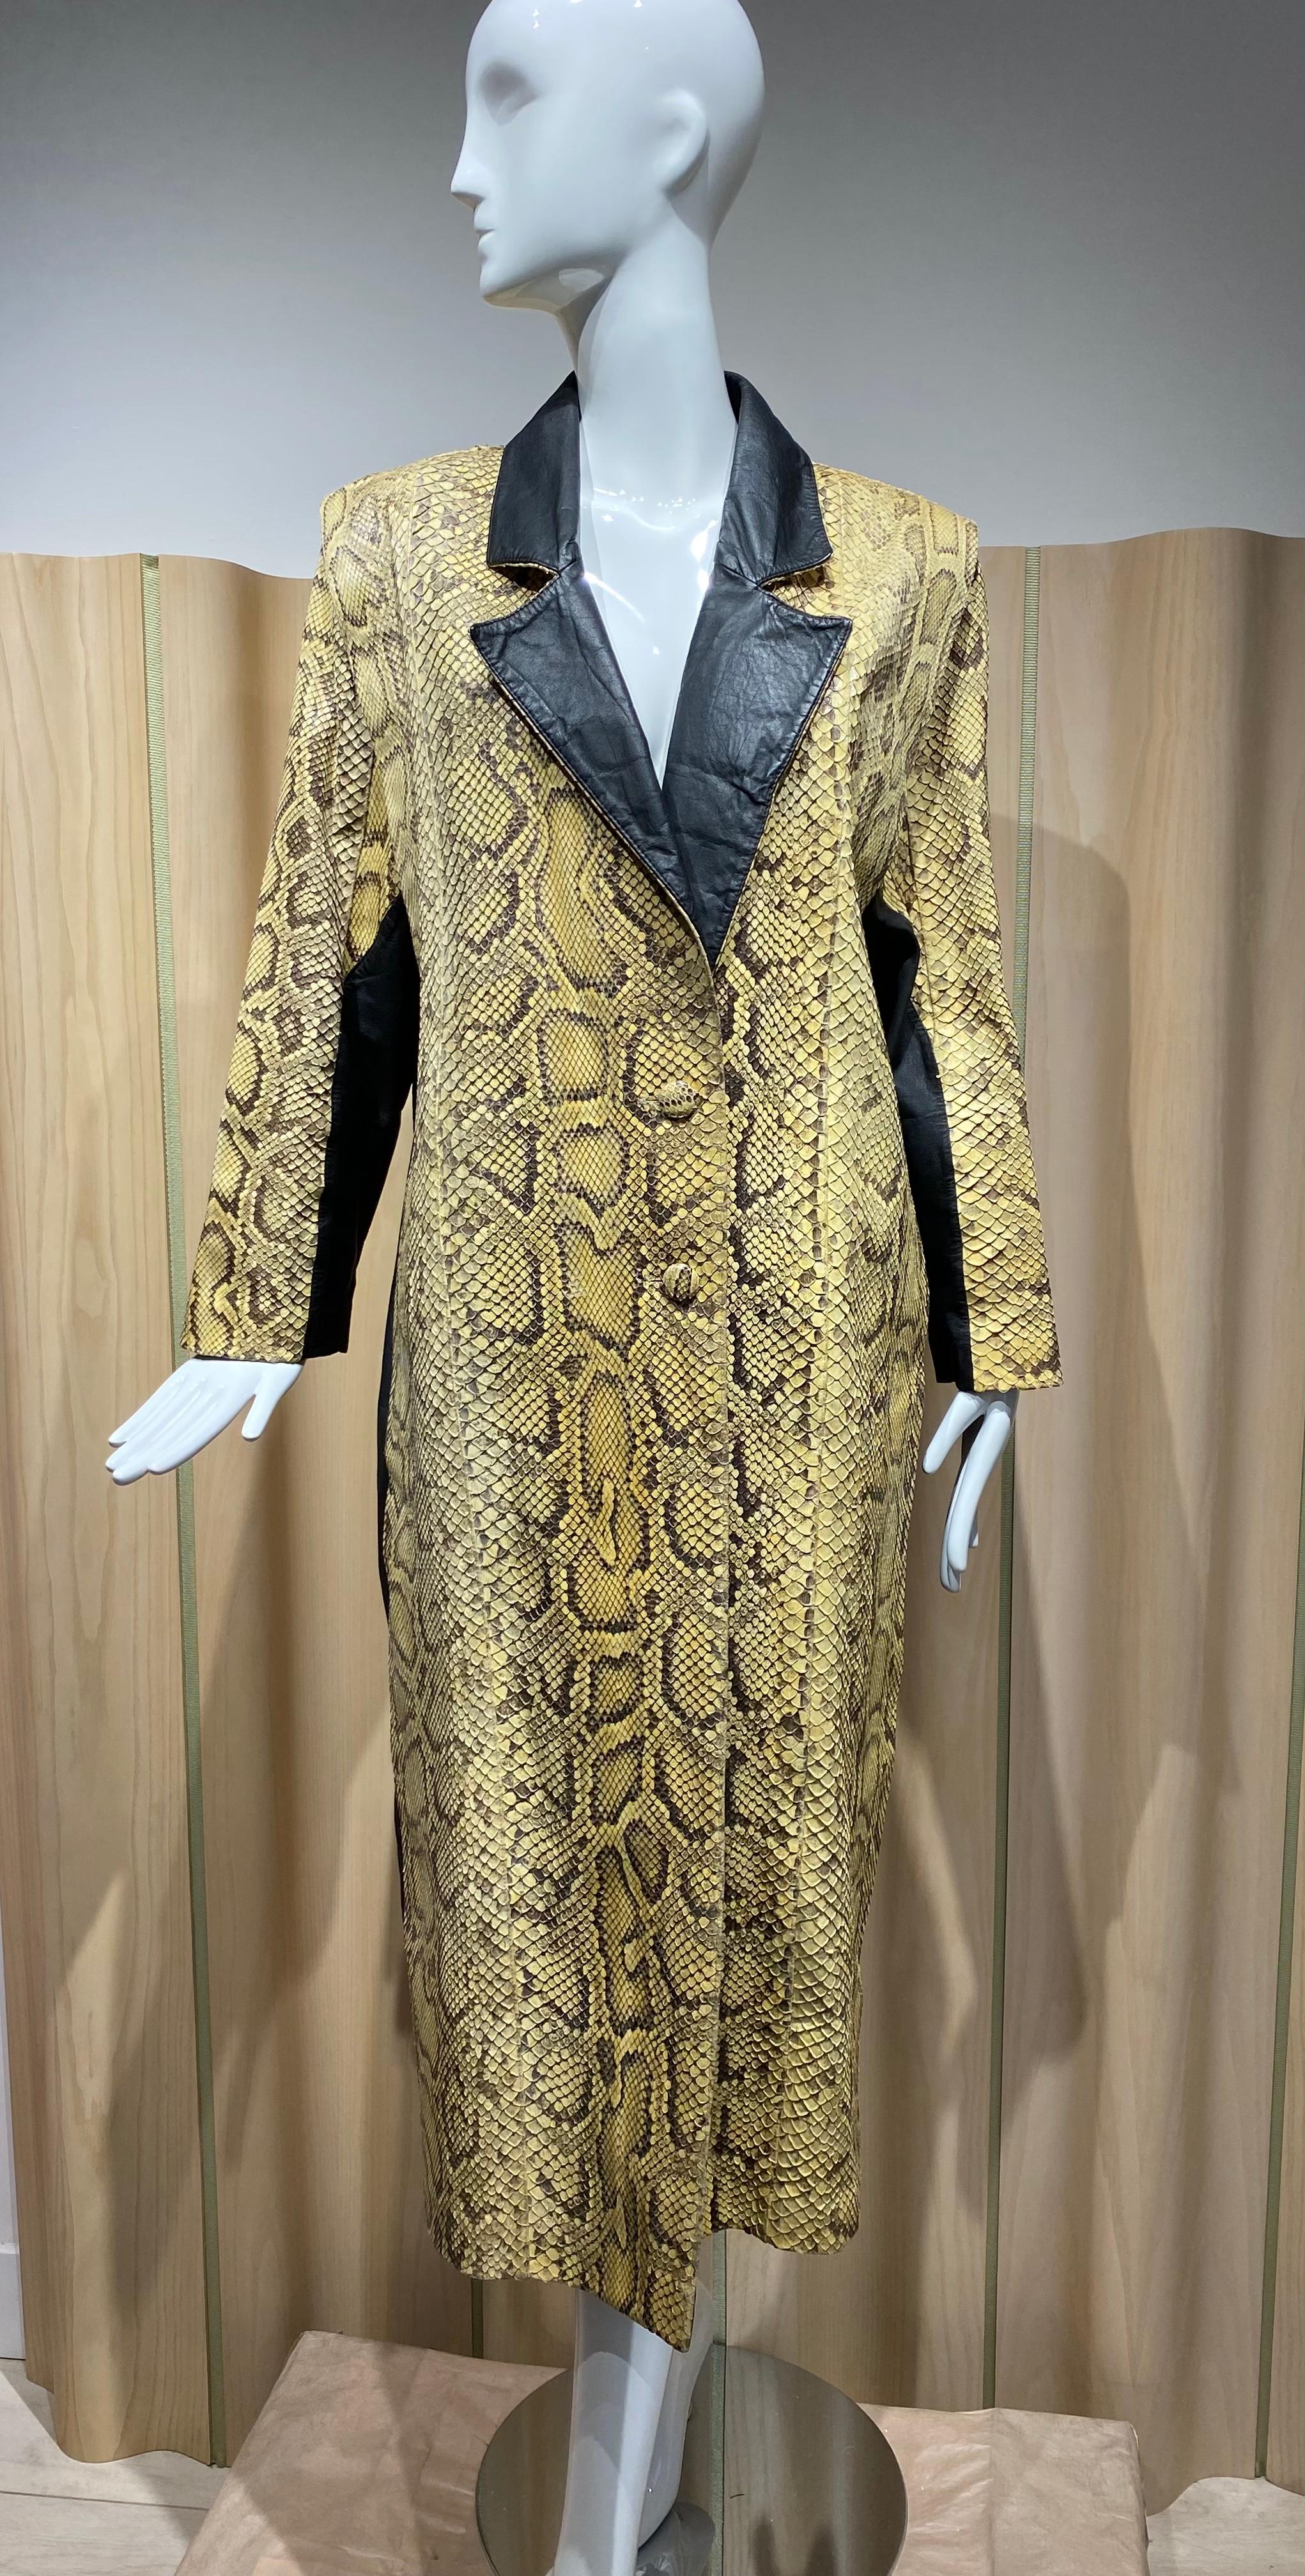 1980s Snake skin leather coat. Beautiful condition. Coat is lined.
Size: Large
Measurement:
Bust: 39”  / Waist: 39”.  / Hip: 39”.  Coat Length: 48”     / Sleeve length: 23”